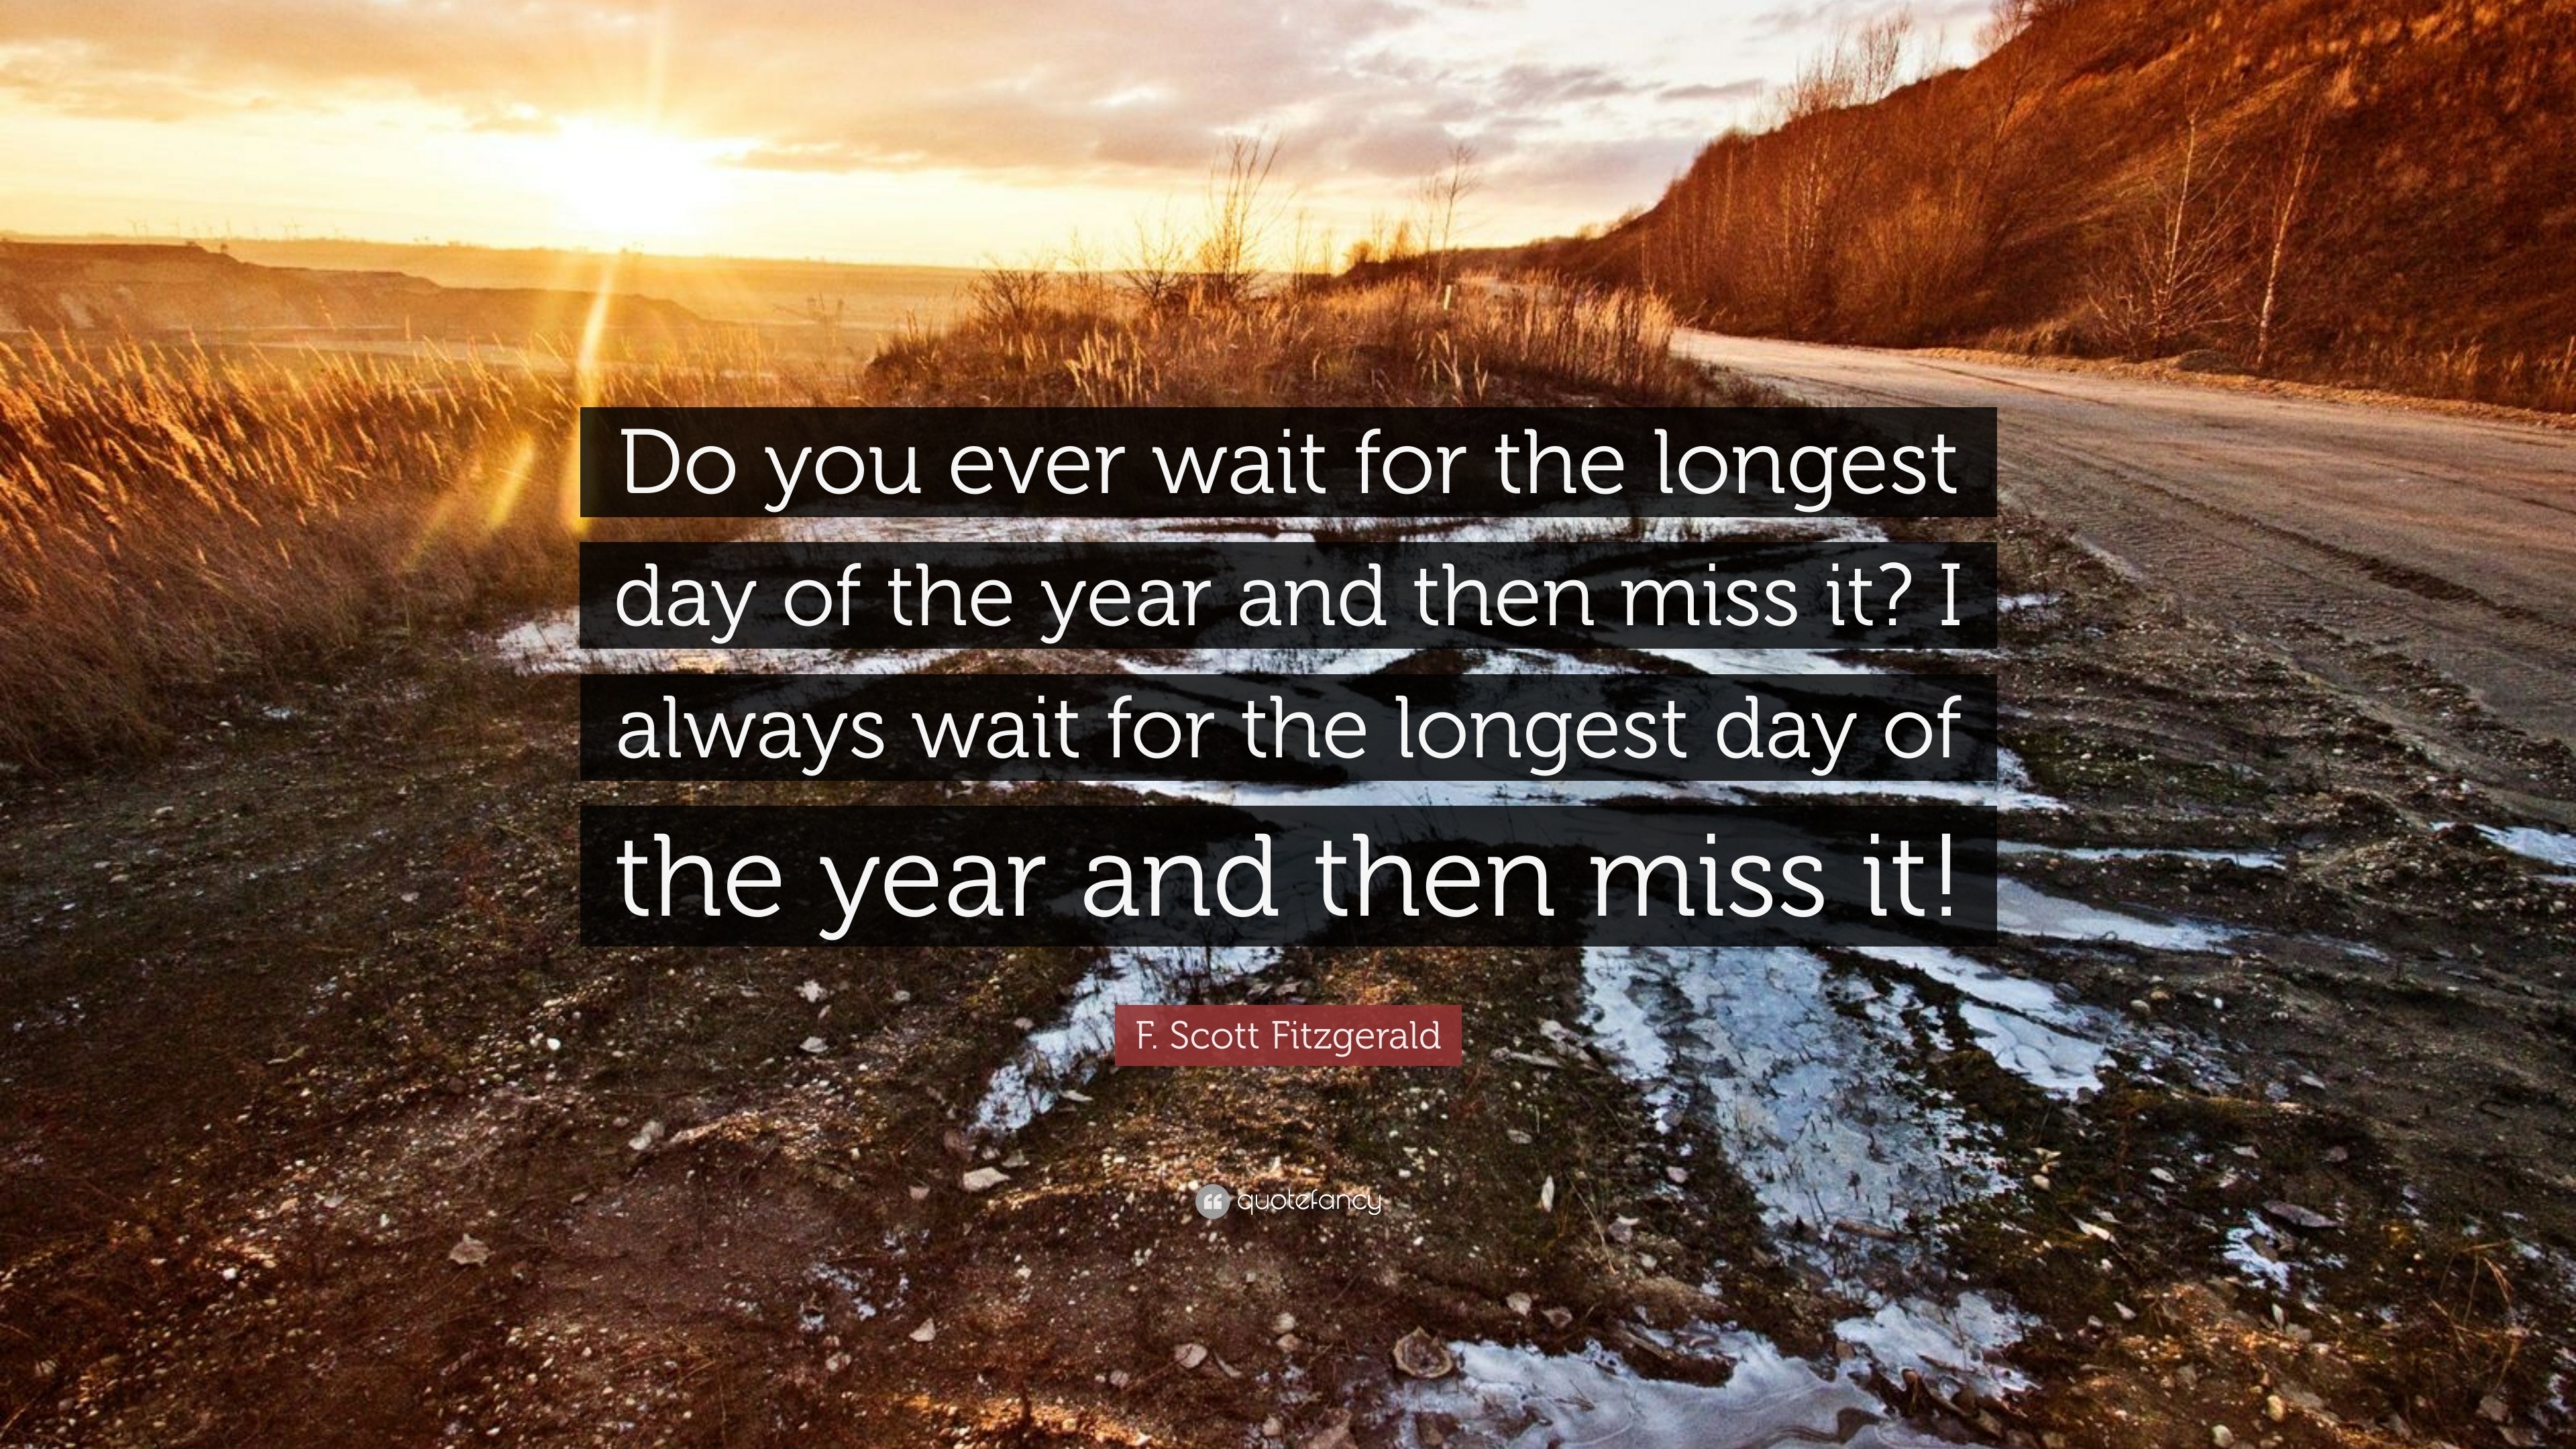 F. Scott Fitzgerald Quote “Do you ever wait for the longest day of the